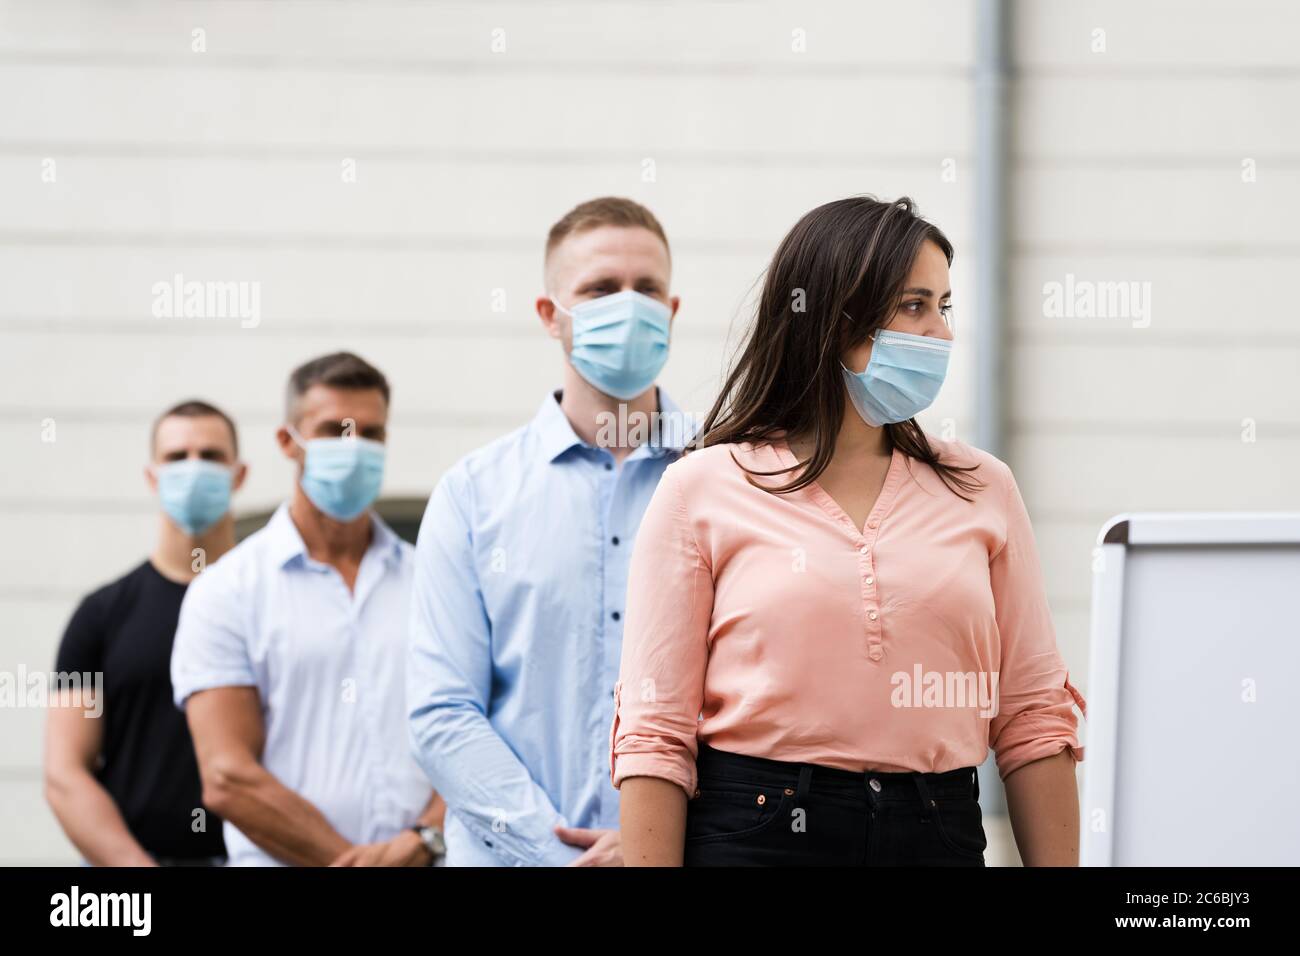 Job Center Line Of Jobless Unemployed Recruitment Seekers With Face Masks Stock Photo